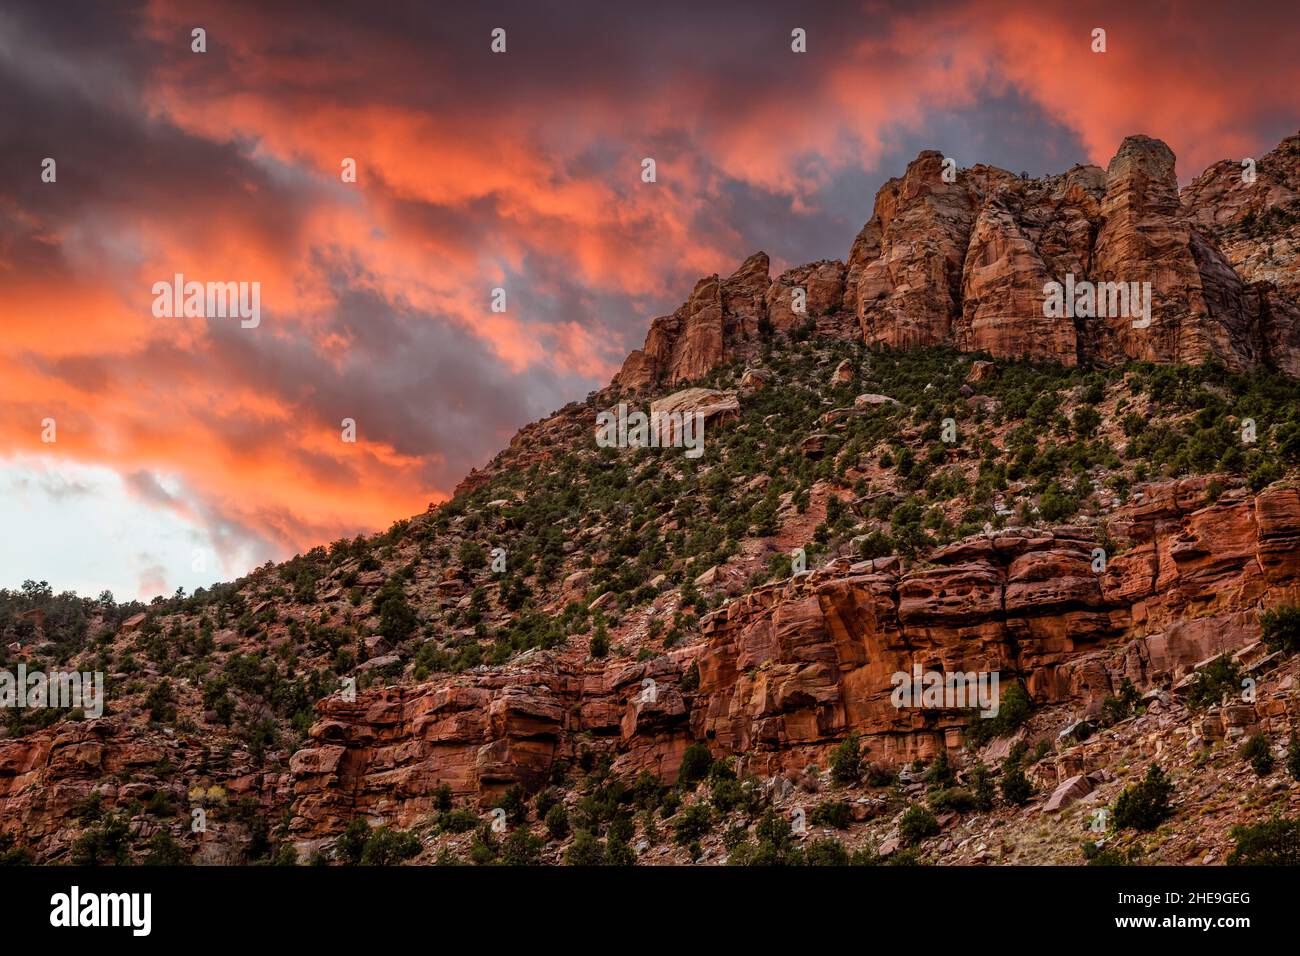 USA, Utah, Zion National Park, Fiery sunset over Zion's red rocks Stock Photo